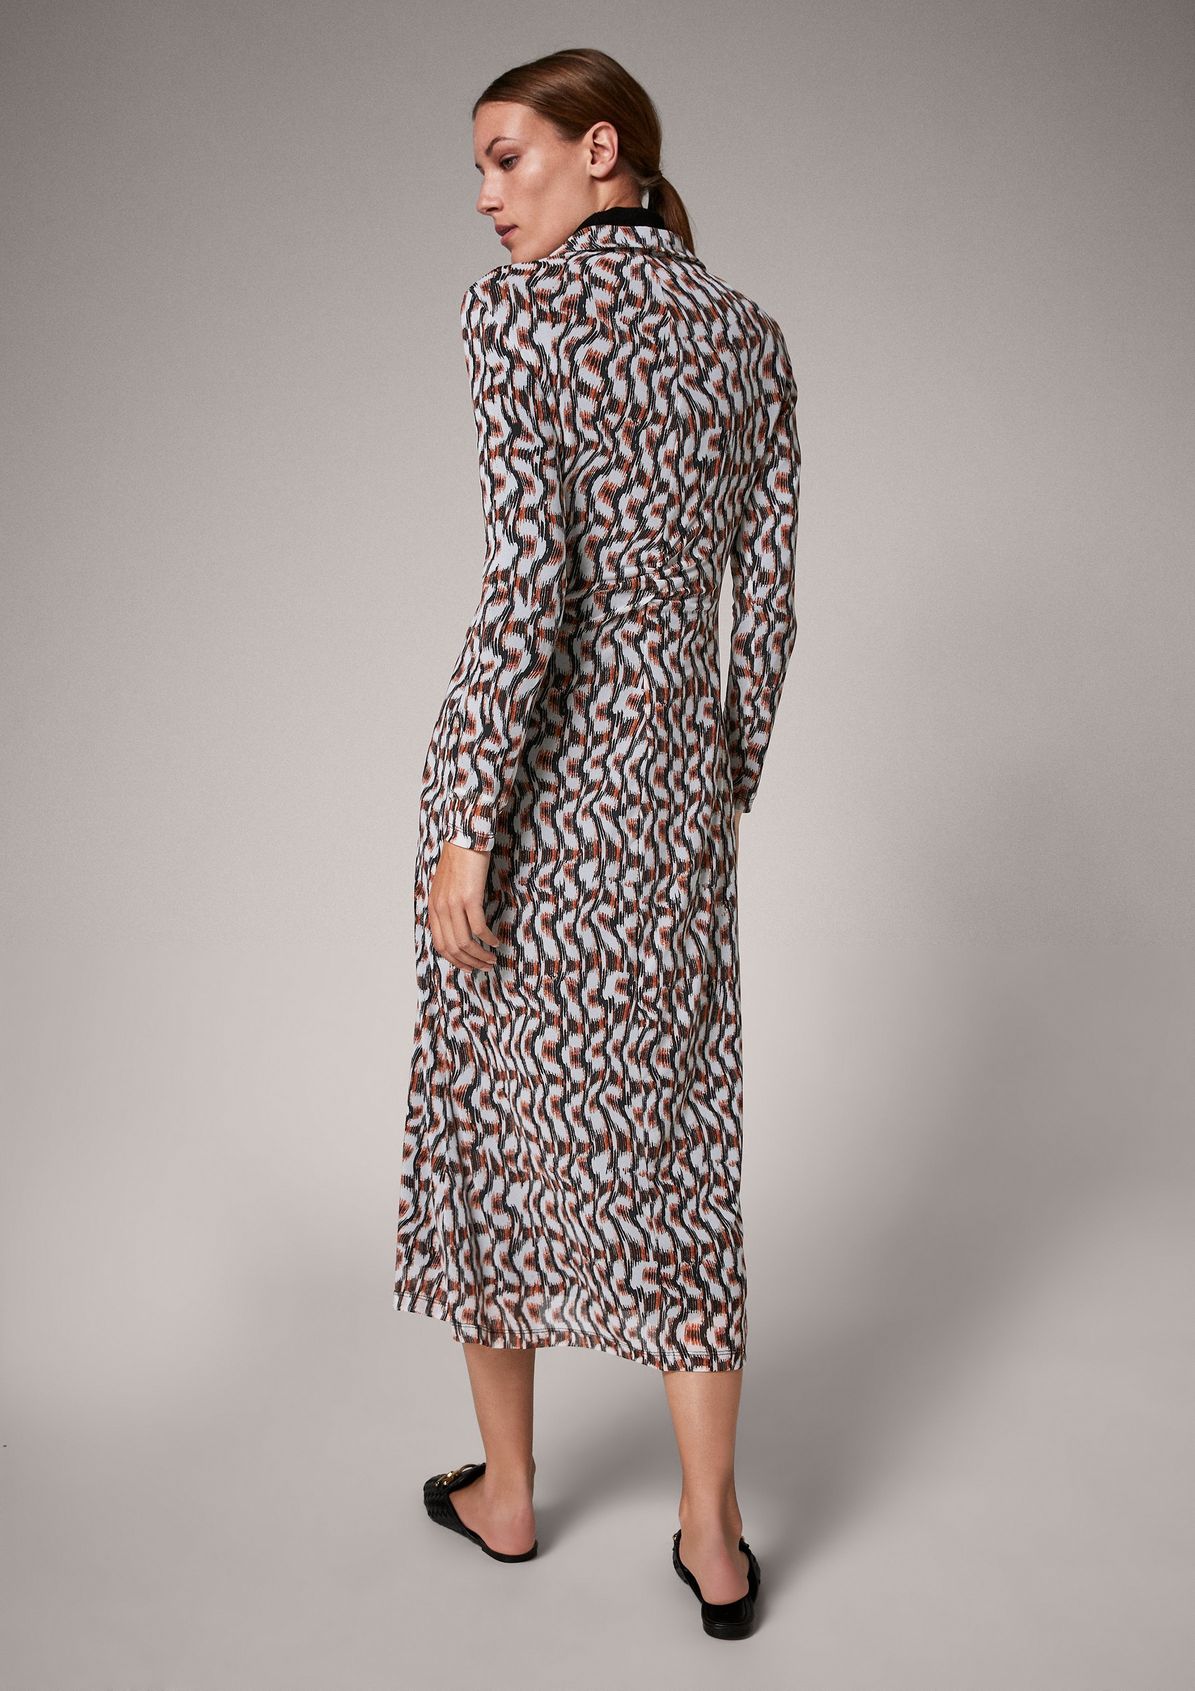 Patterned mesh dress from comma